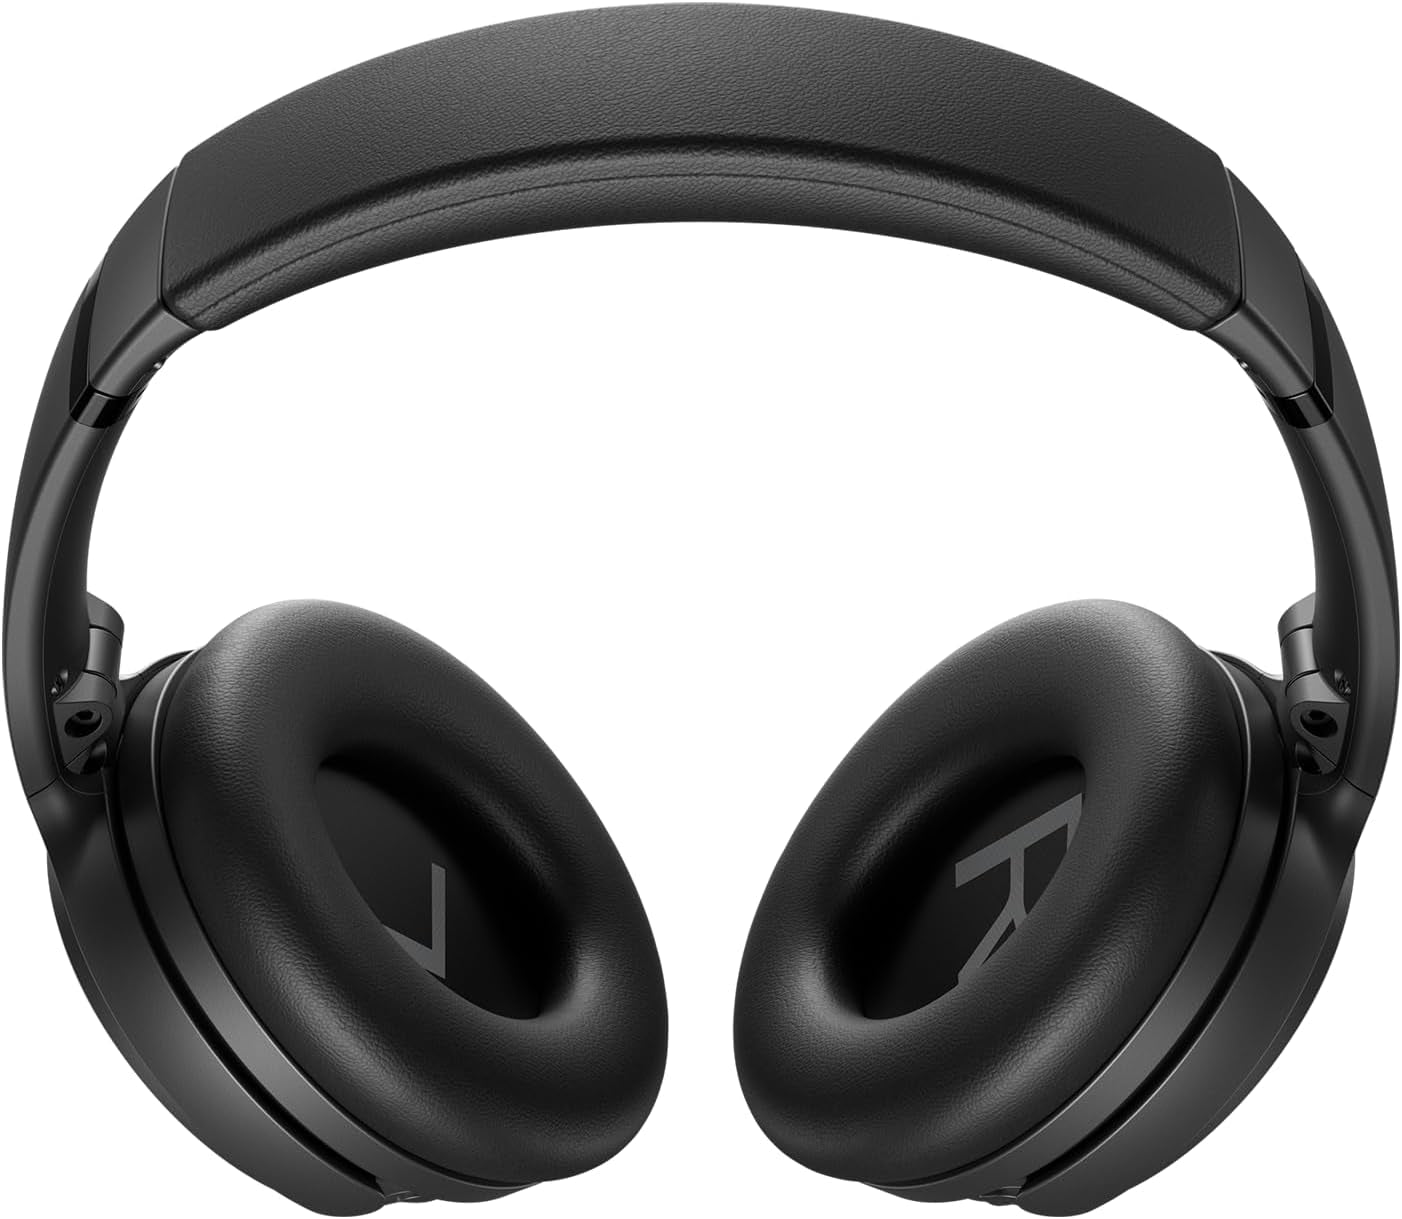 Quietcomfort Wireless Noise Cancelling Headphones, Bluetooth over Ear Headphones with up to 24 Hours of Battery Life, Black